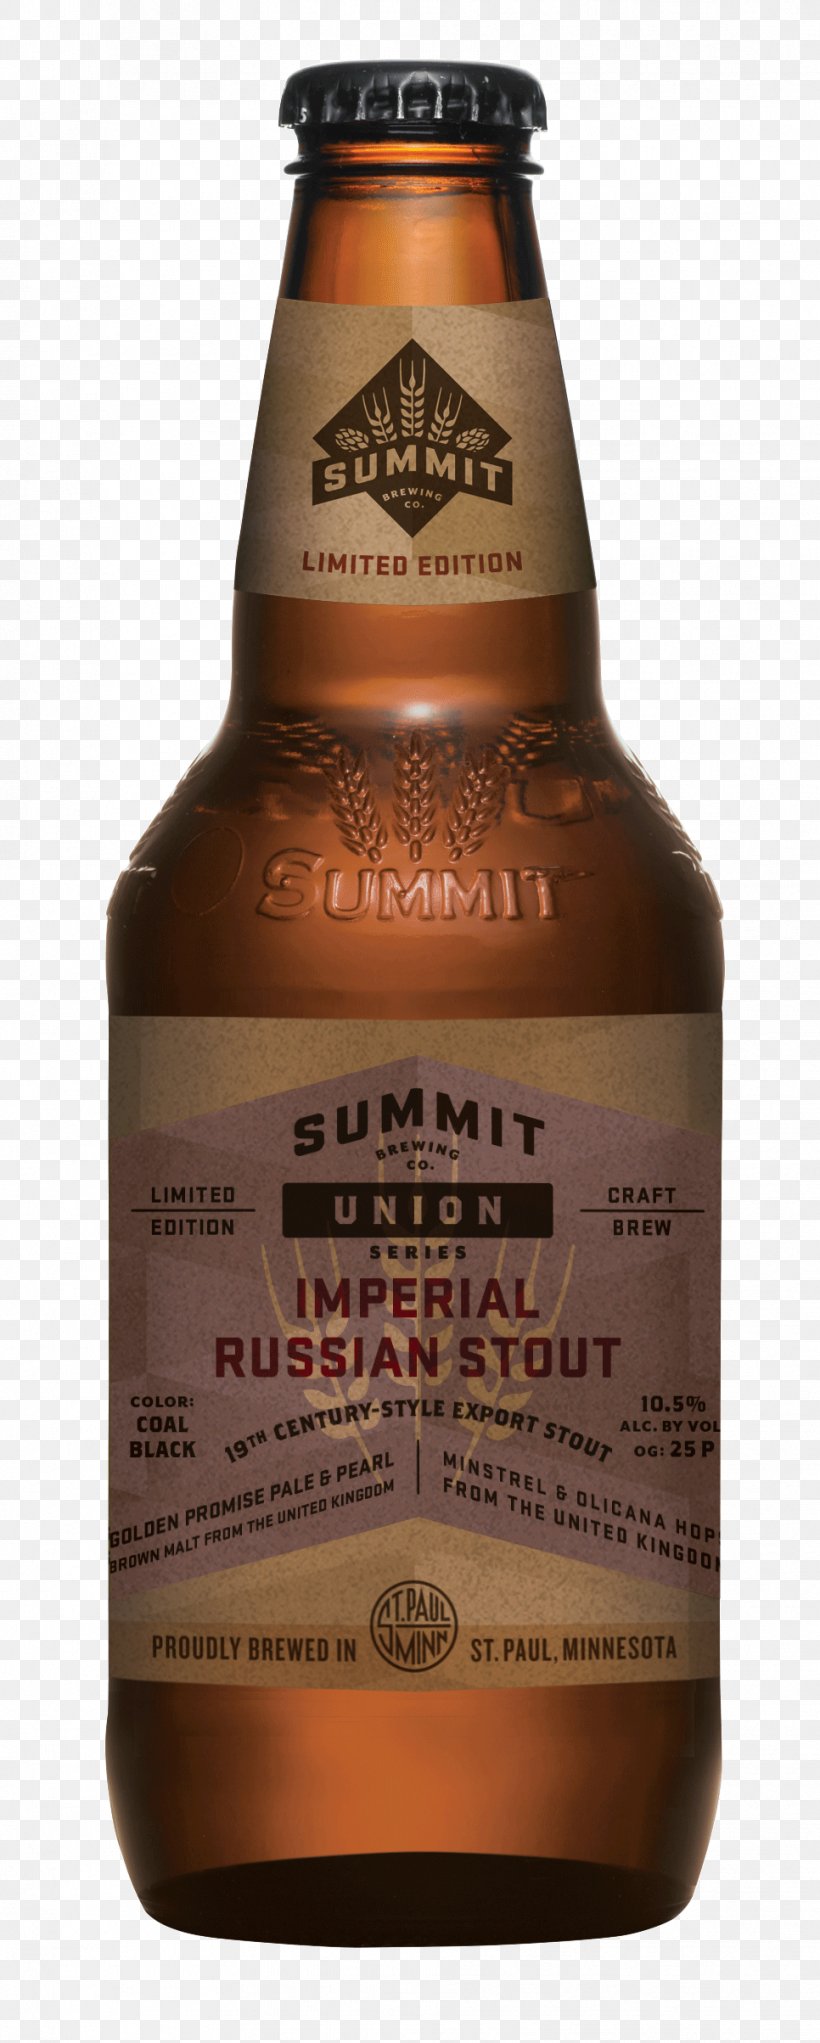 Steam brew imperial stout фото 28